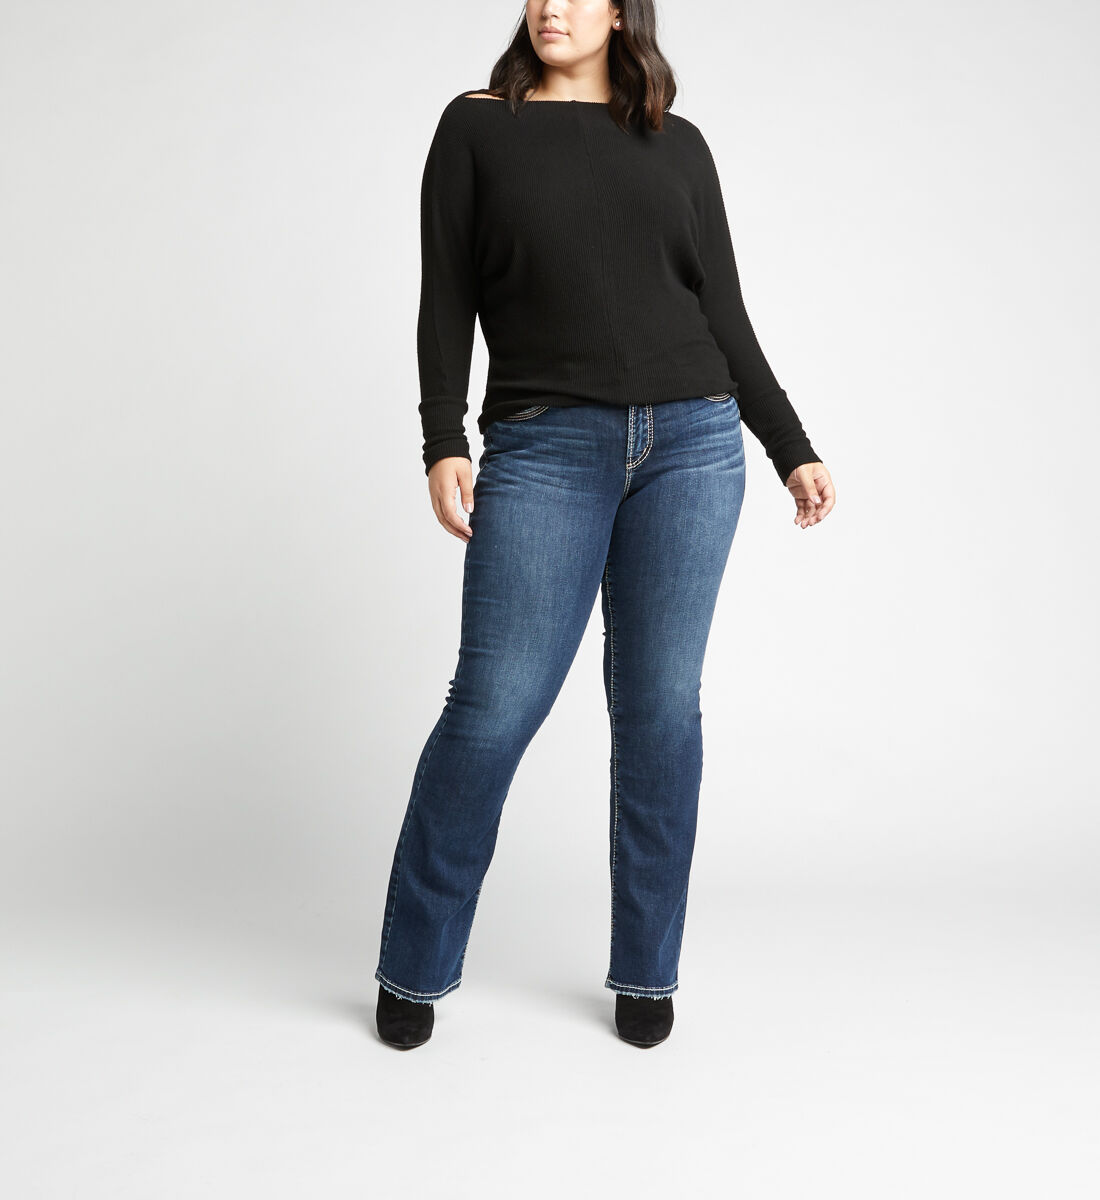 tall girl jeans plus size